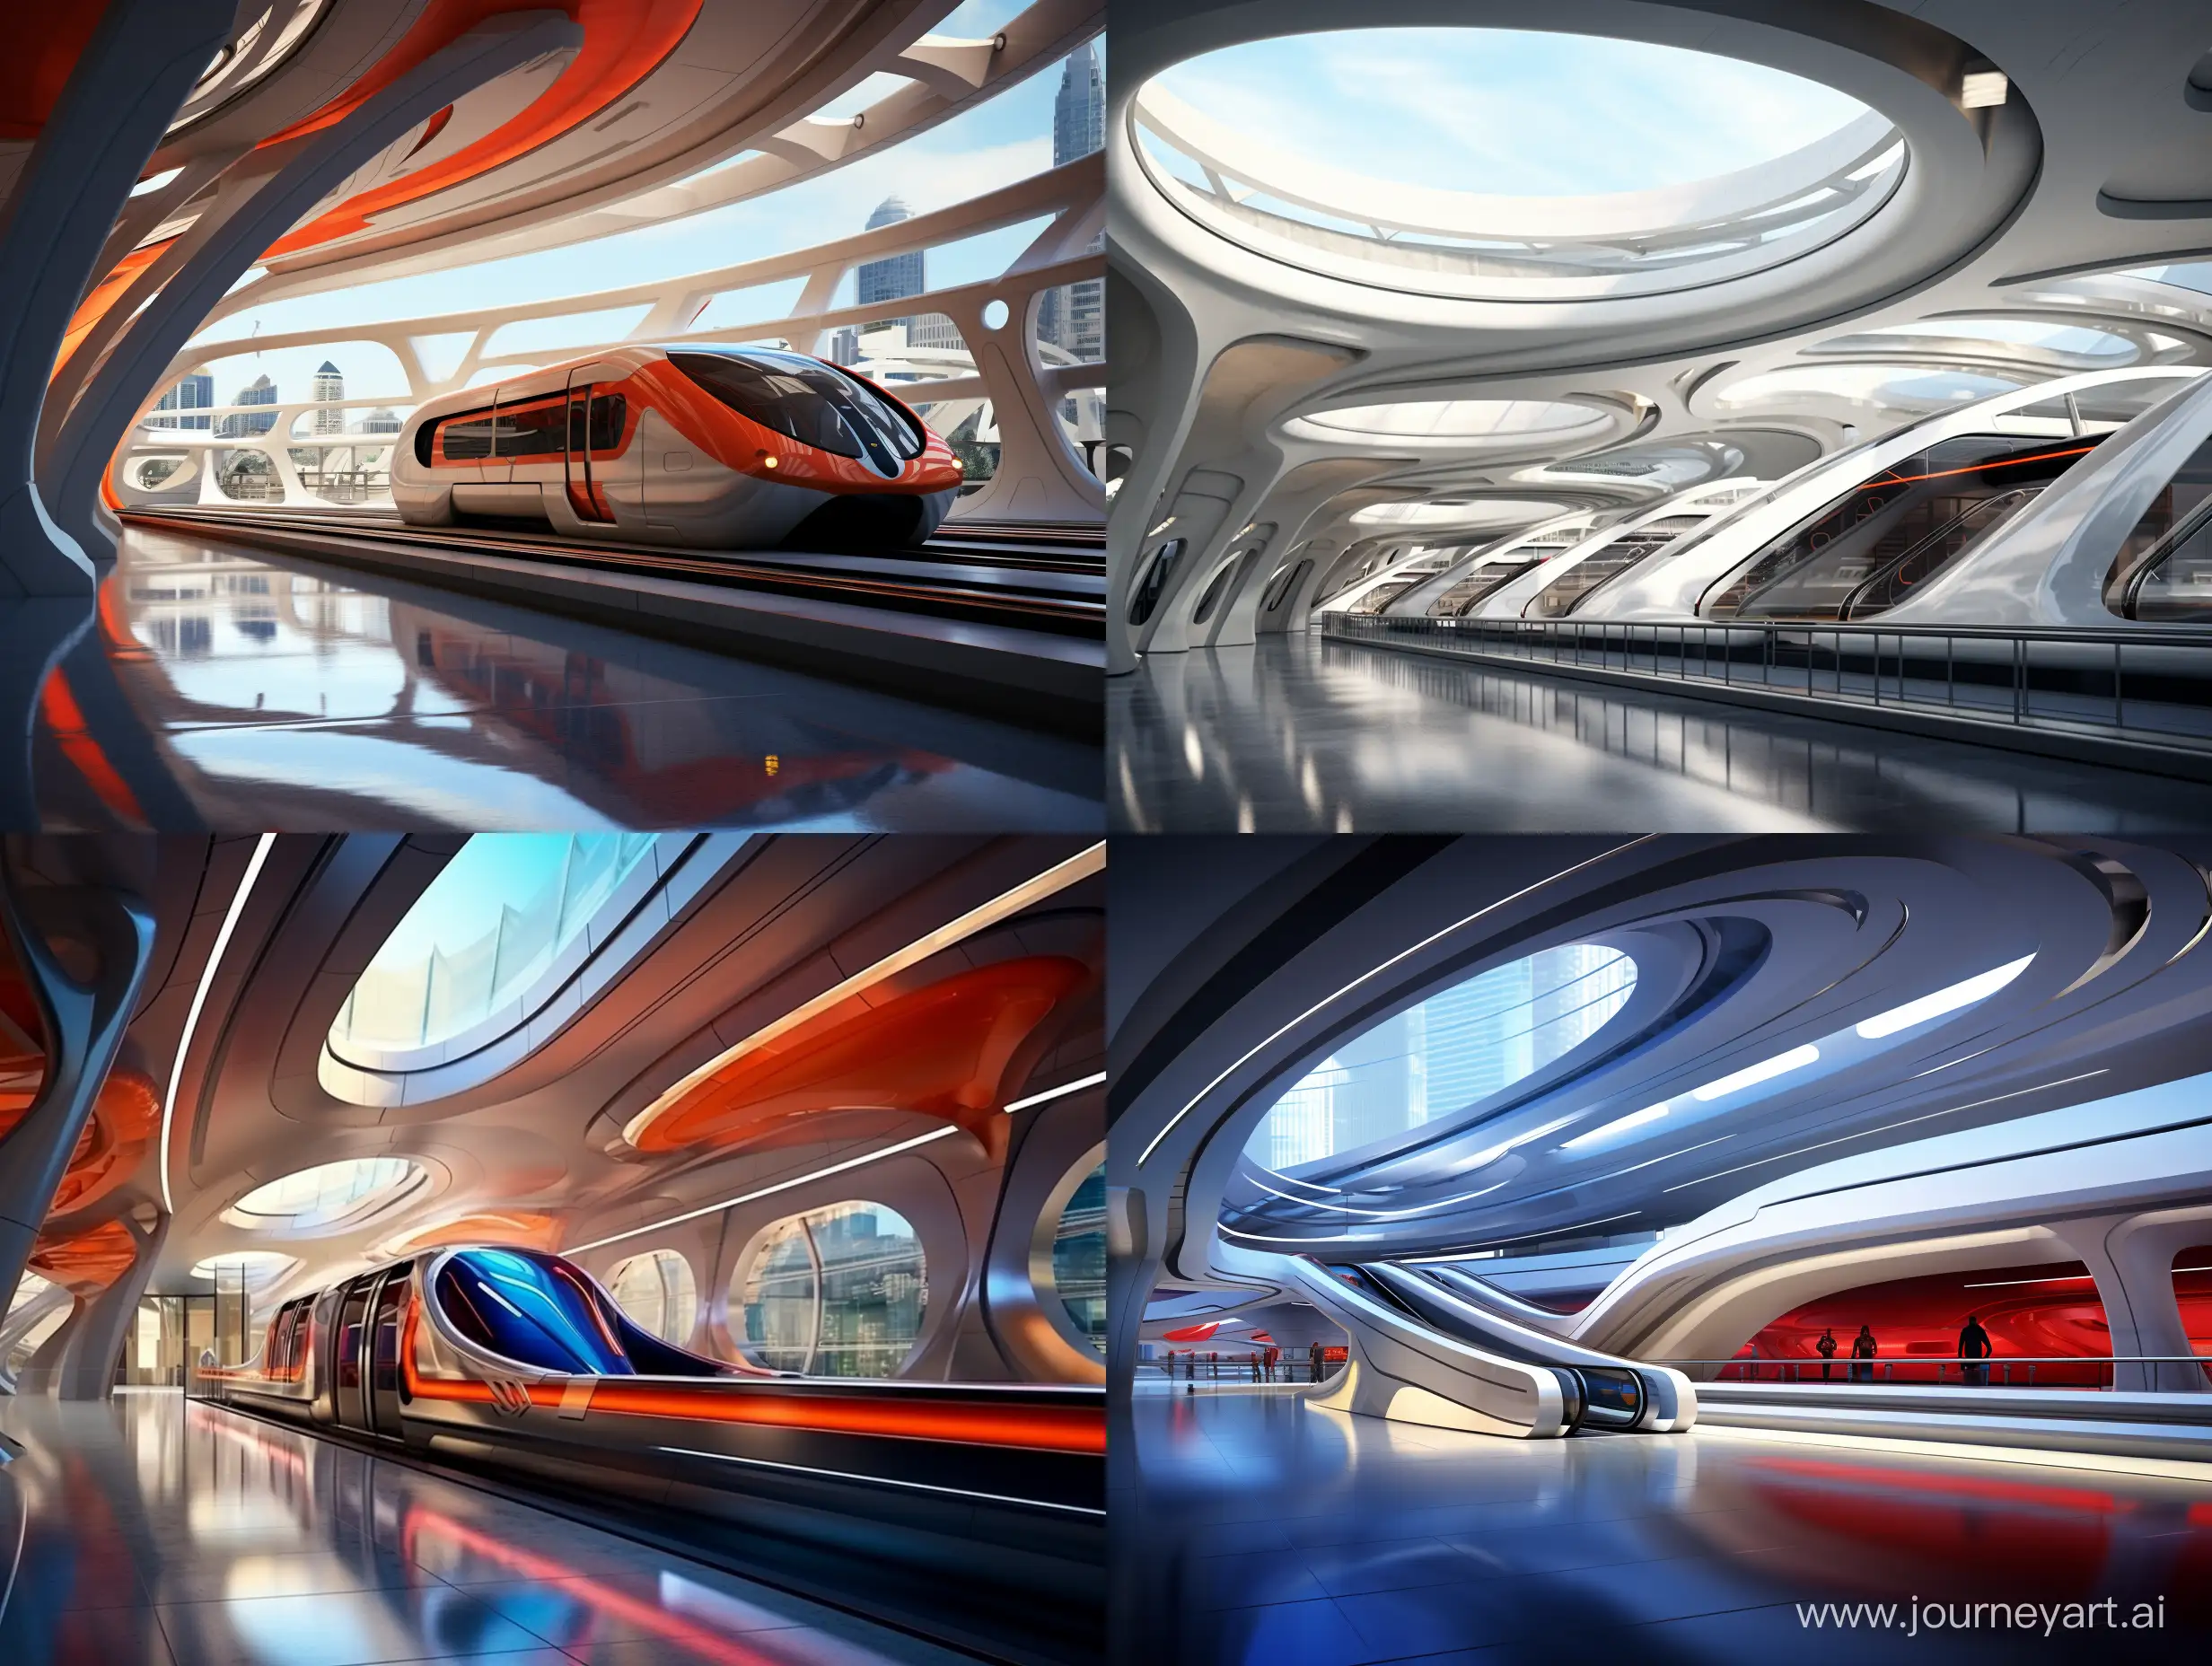 Futuristic-Metro-Station-Design-by-Zaha-Hadid-with-Visible-Rails-and-Arriving-Train